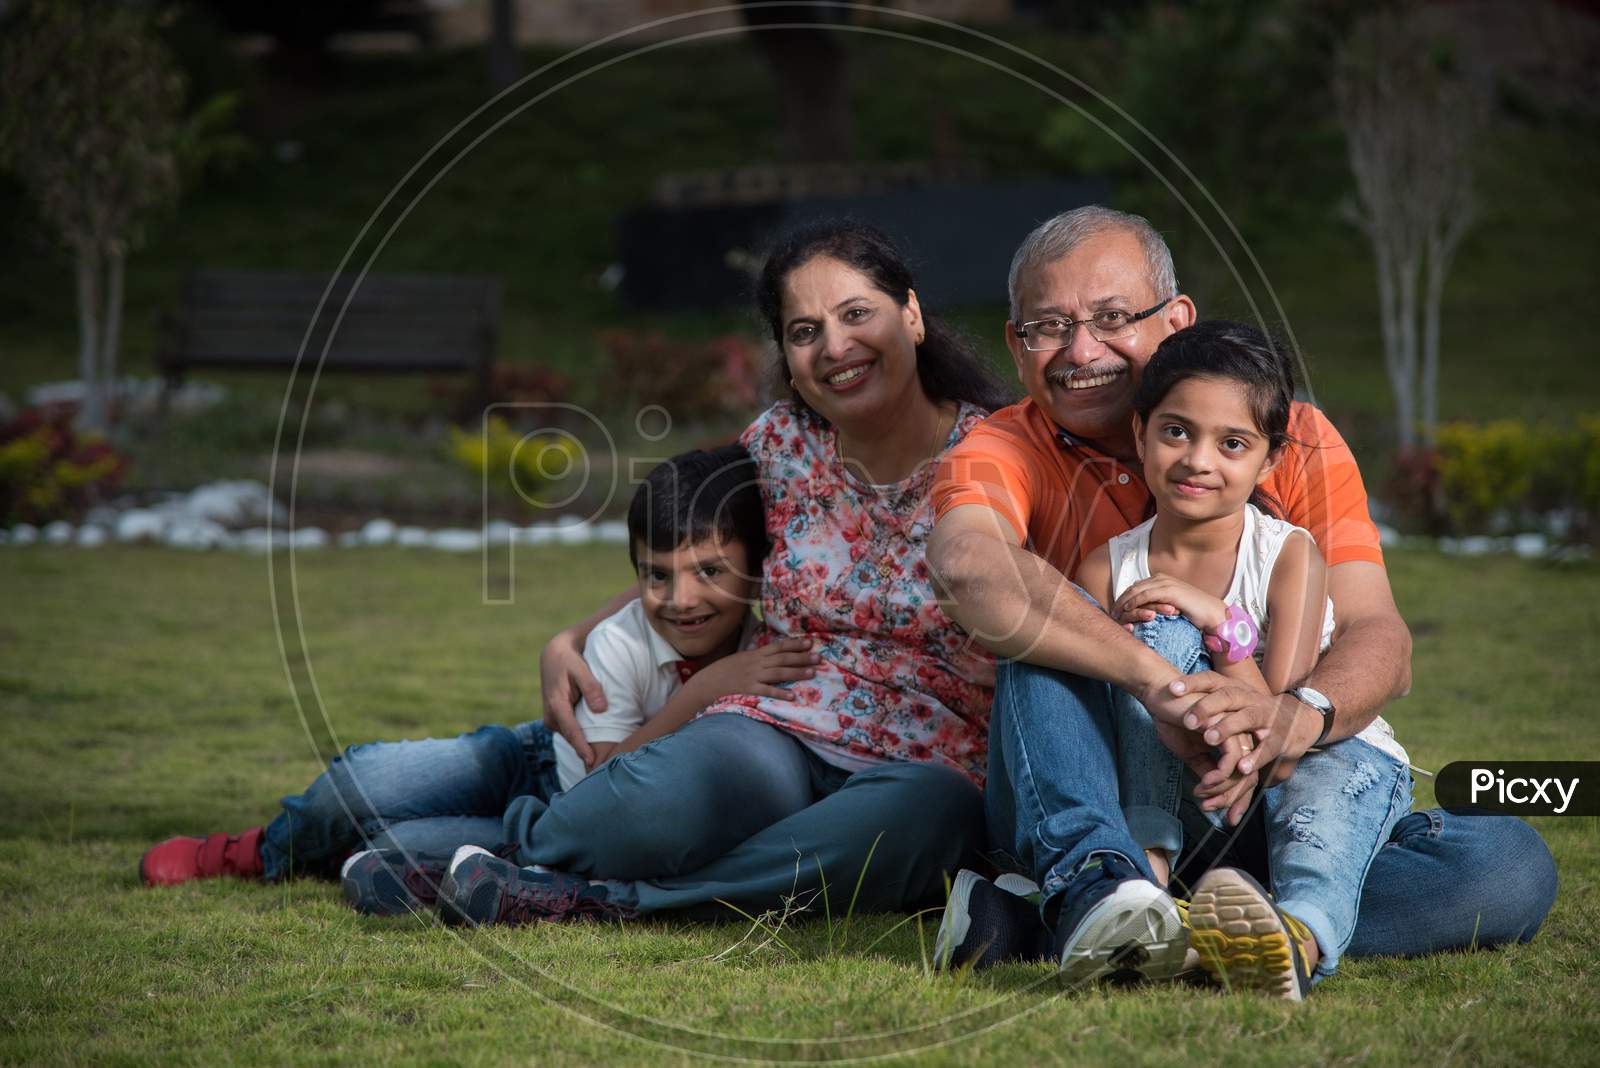 Portrait of Happy Indian/Asian Family - grand parents sitting on Lawn with kids / grandkids, outdoor